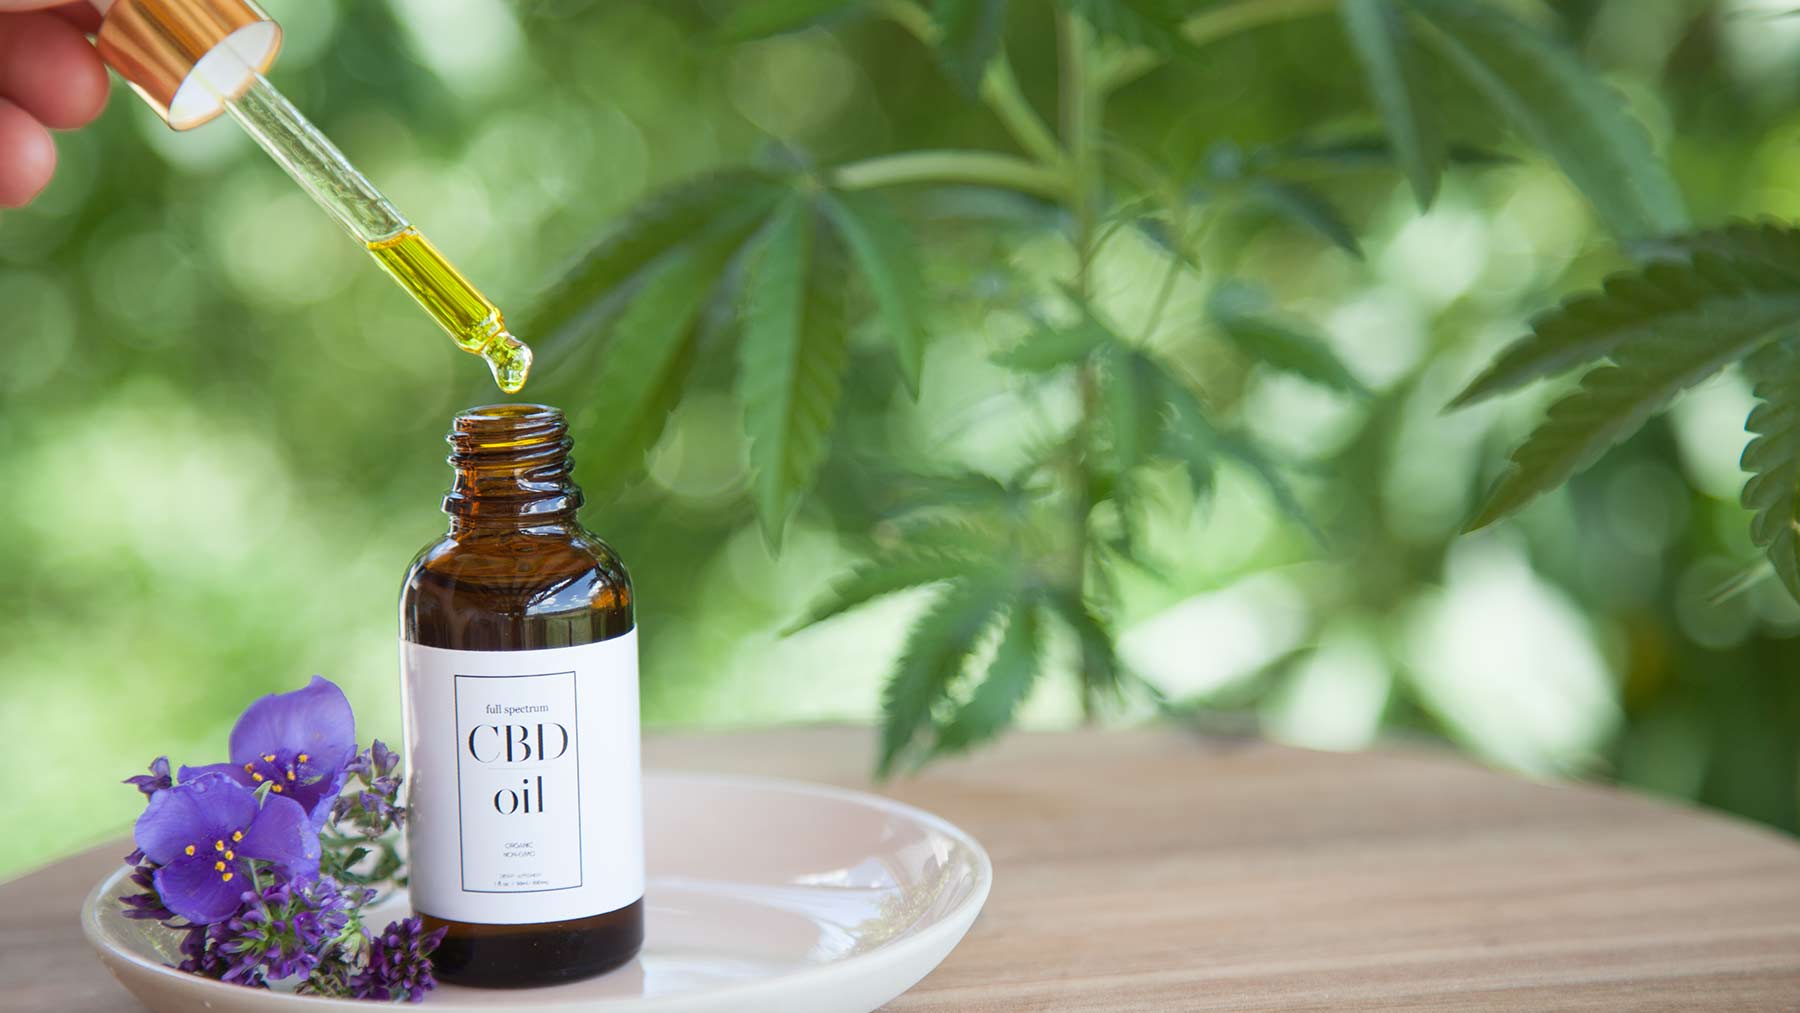 The Best Use of the CBD for You